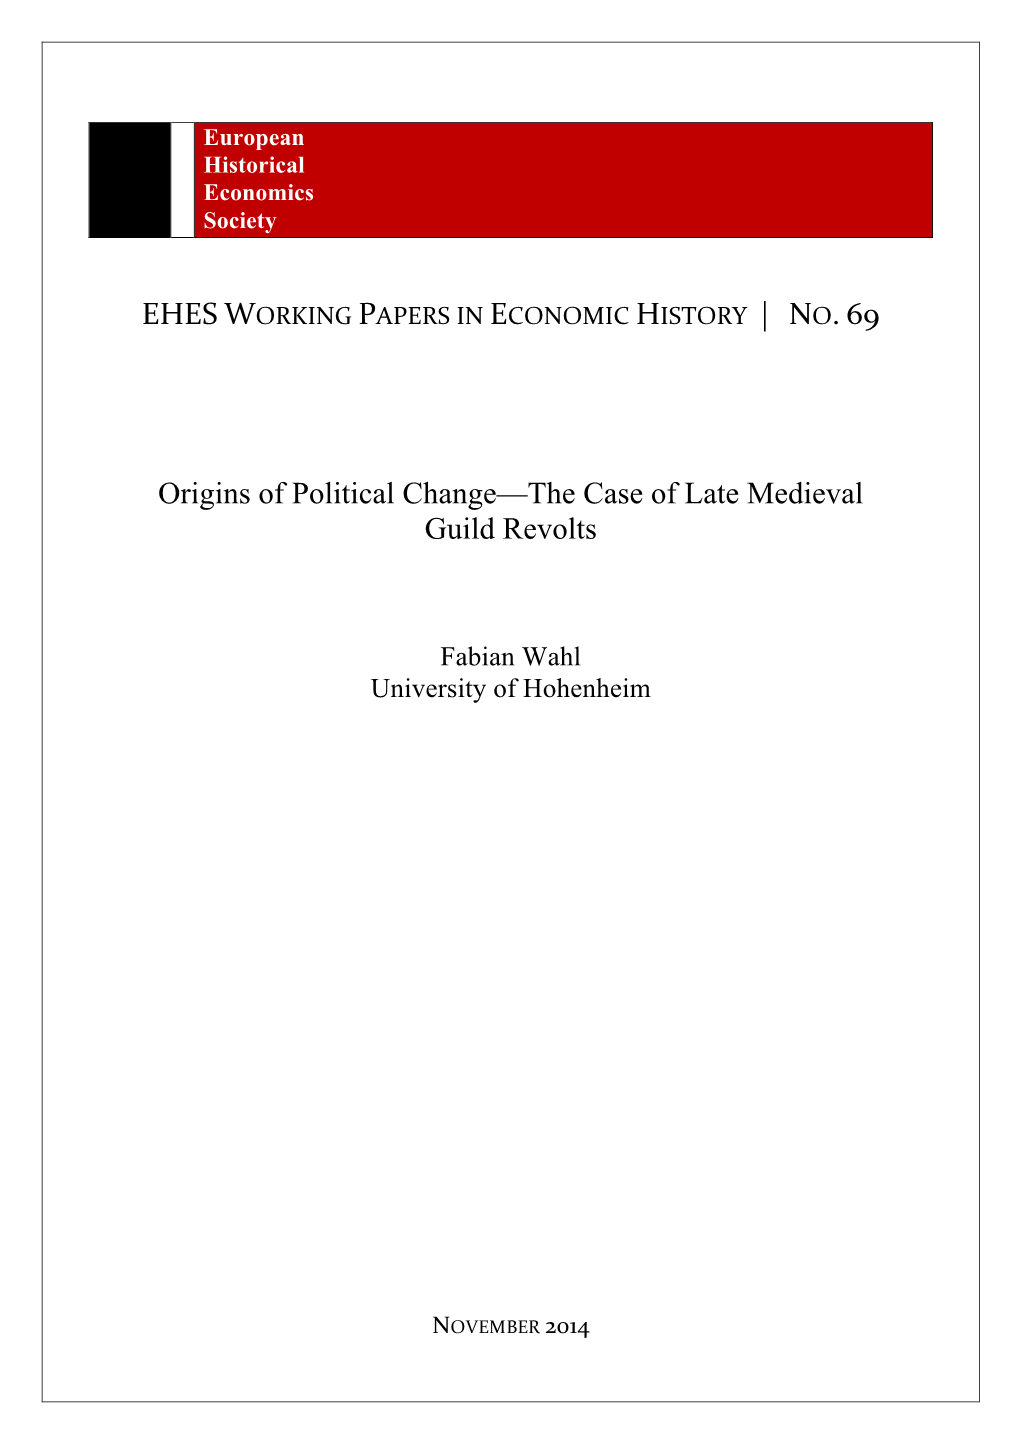 Origins of Political Change—The Case of Late Medieval Guild Revolts